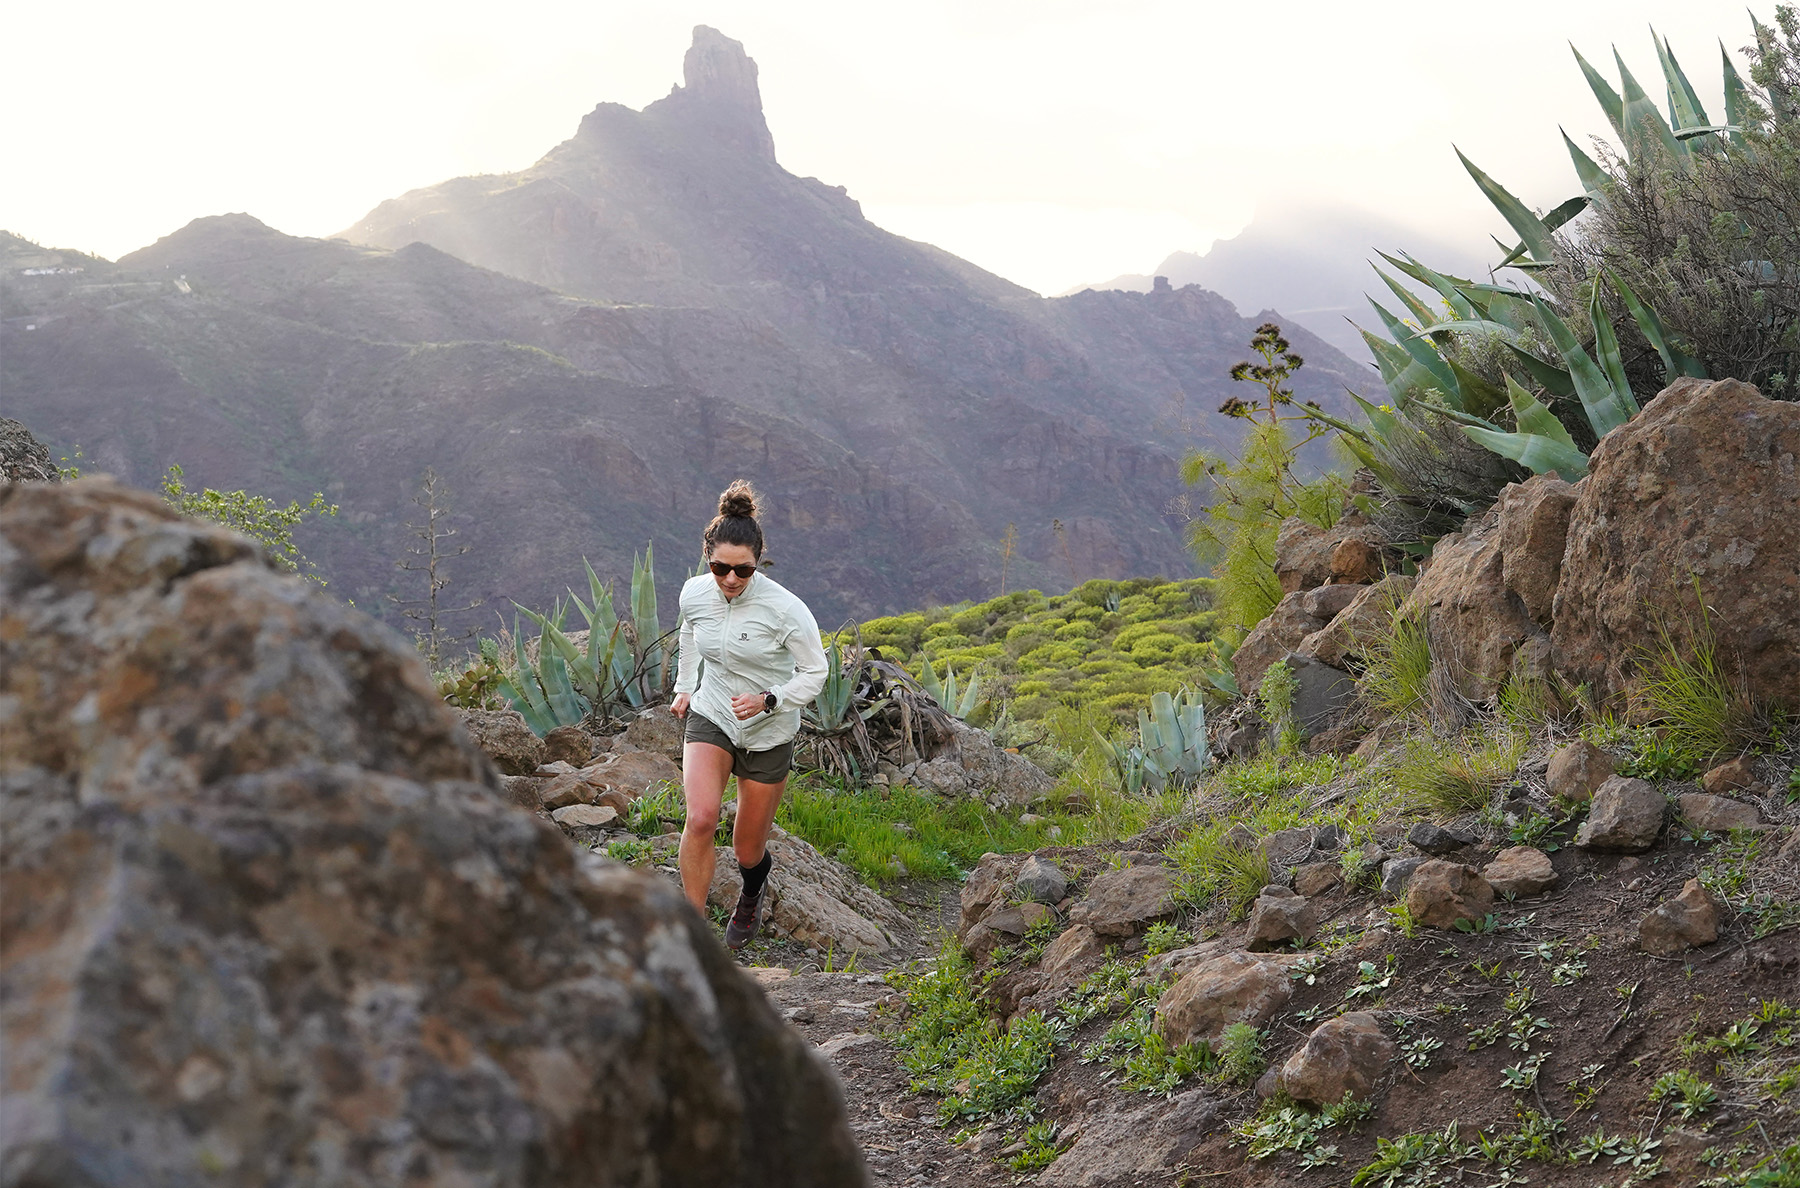 In this ‘Race Edition’ of Running Through the News, Salomon athlete, Leah Yingling (who’s already been on major podiums twice this year), joins us to discuss race results from the past few weeks and to preview the stacked fields at Madeira Island Ultra Trail and Canyons 100k.